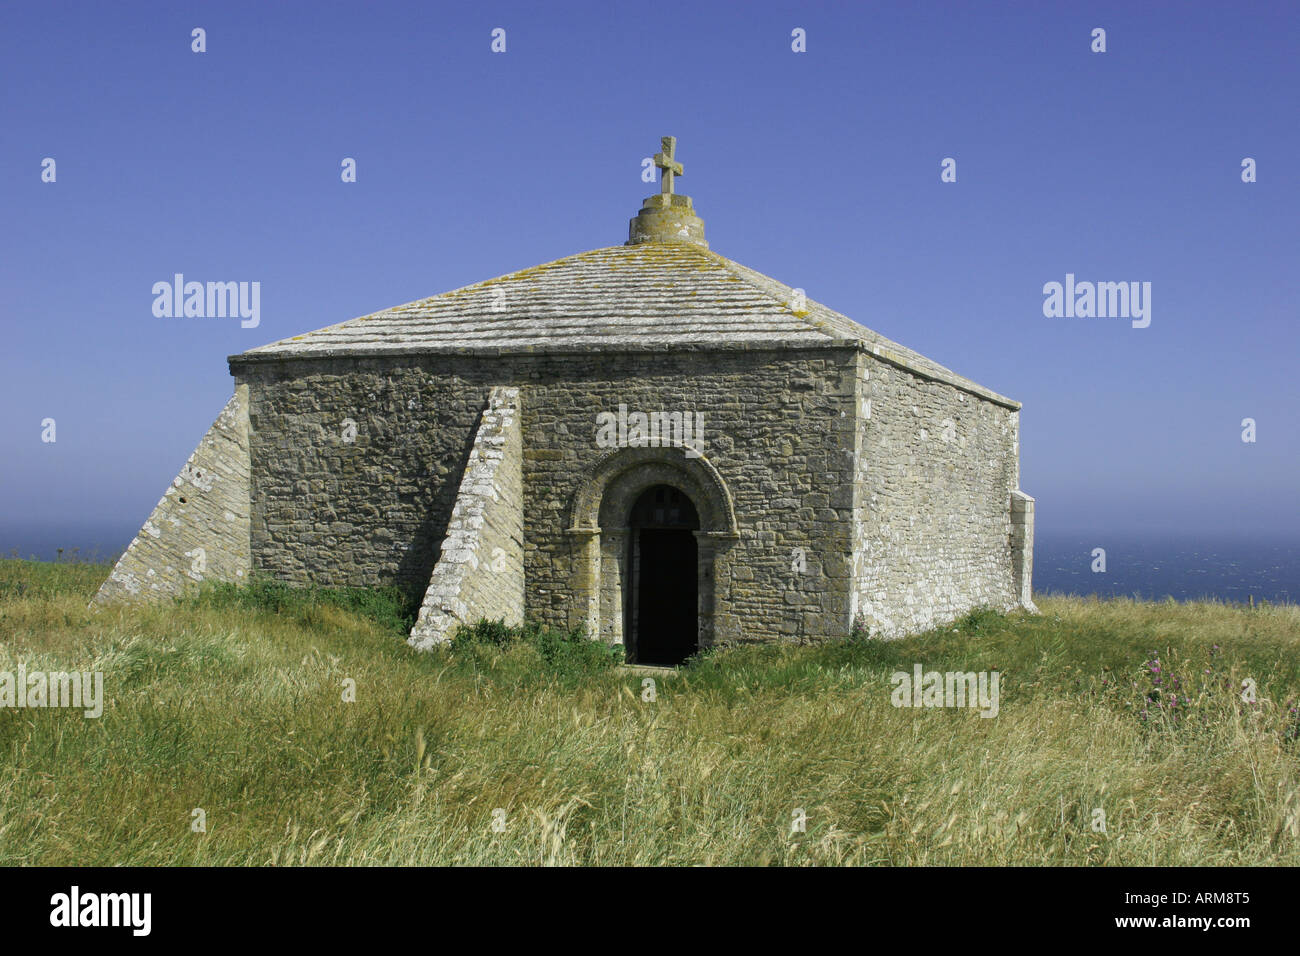 St Aldeheims Charch at St Albans Head on the Dorset Coastline Purbeck England UK Stock Photo